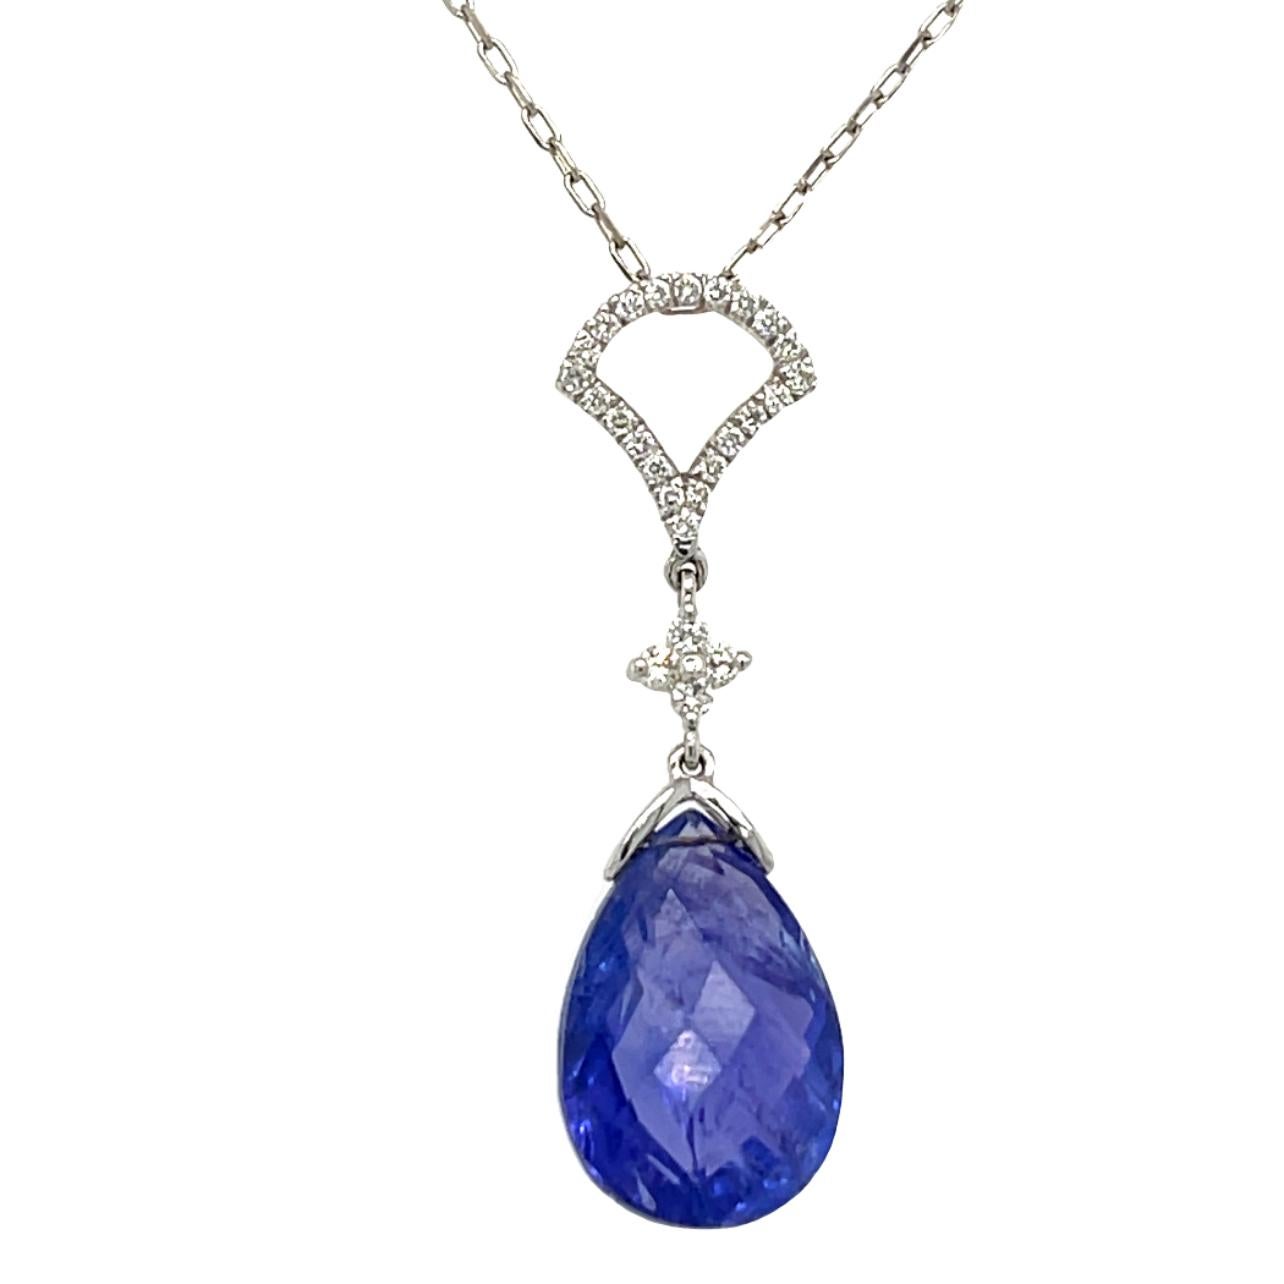 These gorgeous deep blue Briolette Tanzanite dangling pendant is beautiful to wear to any event. The Tanzanite has natural inclusions and is tension set in 18 karat white gold and has brilliant cut round diamonds. The pendant comes with a silver